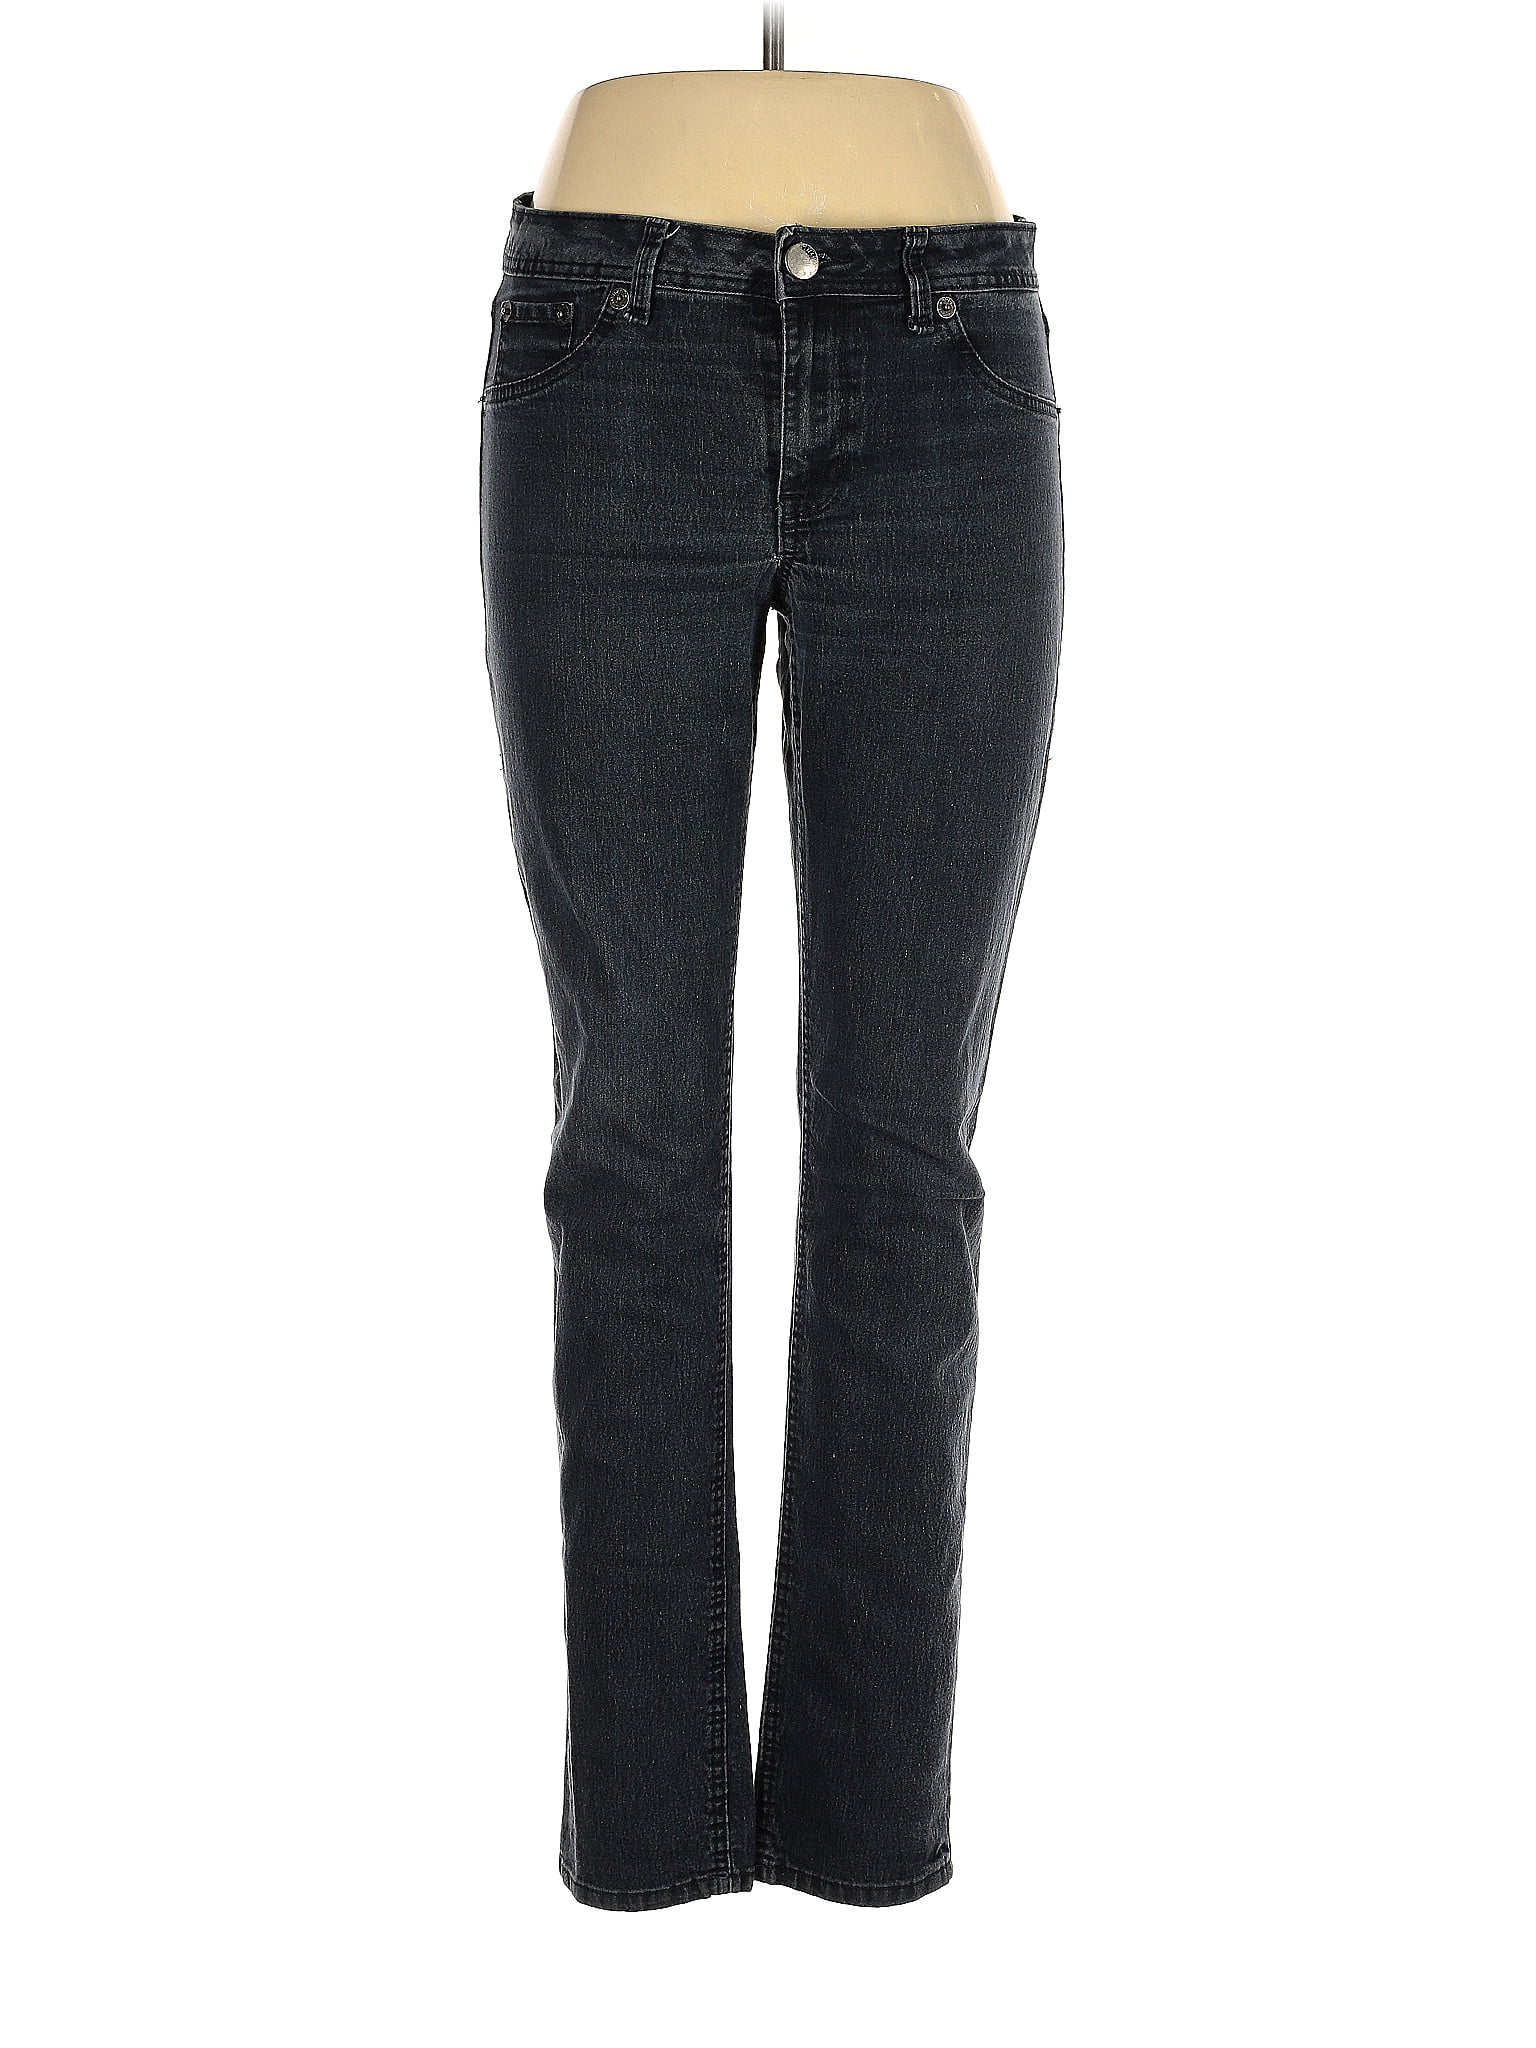 17/21 Exclusive Denim Women's Jeans On Sale Up To 90% Off Retail